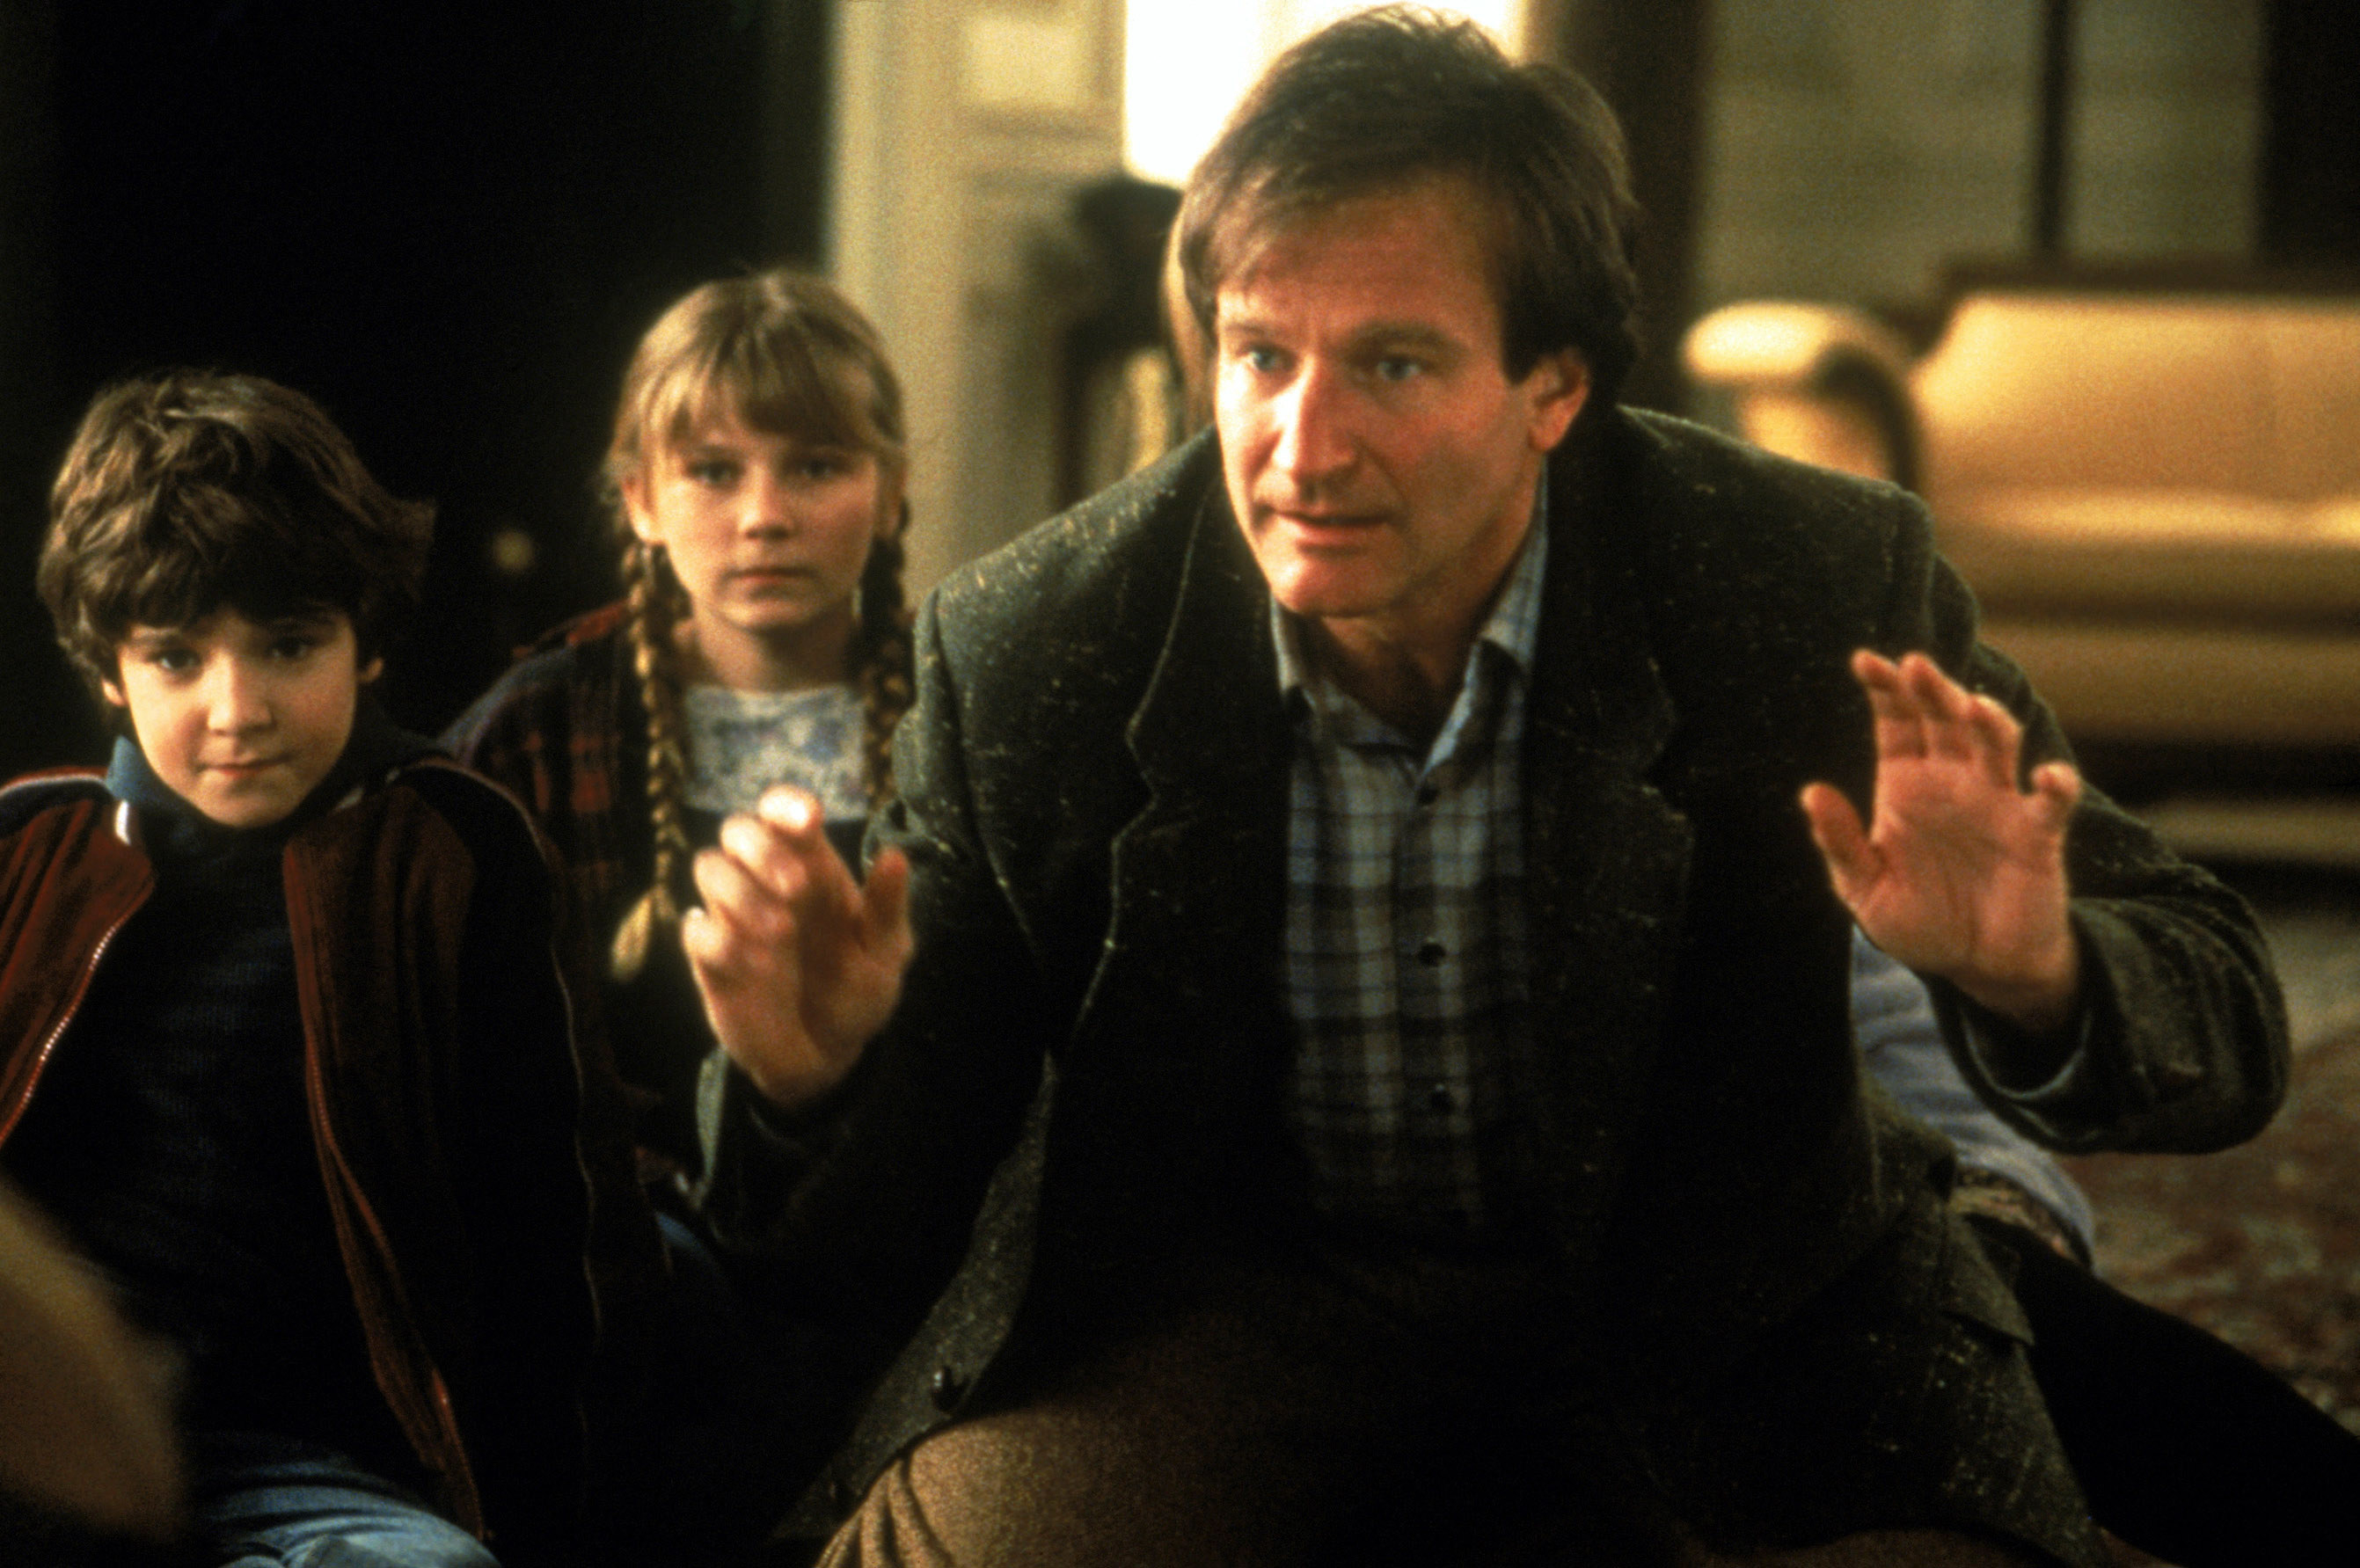 Robin Williams protecting the kids during a scene in the movie